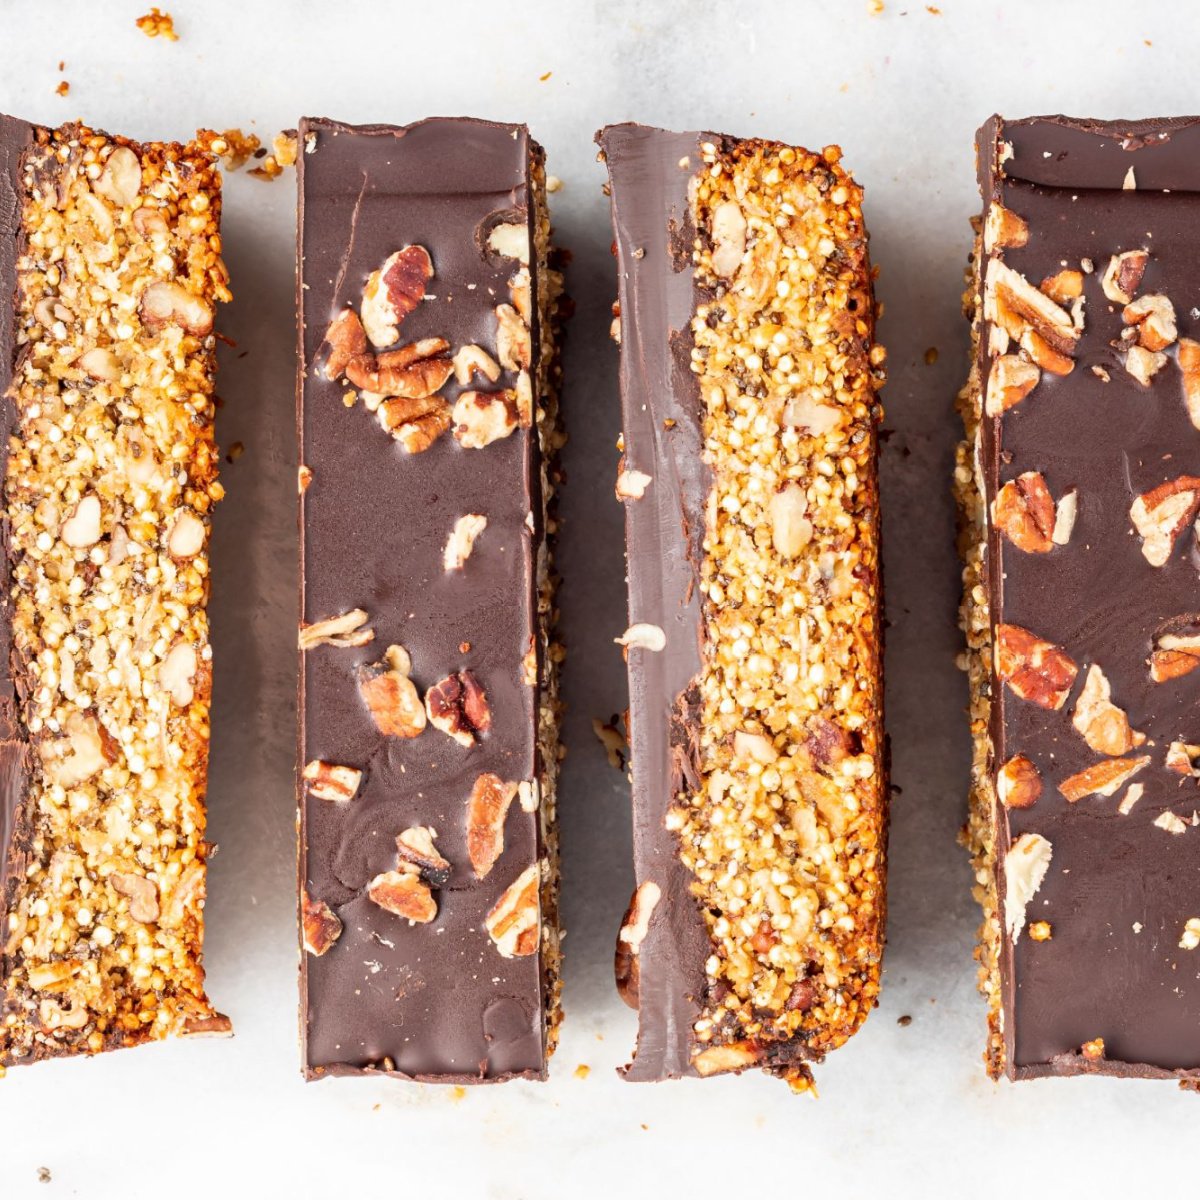 Overhead shot of a superfood bar topped with chocolate and nuts